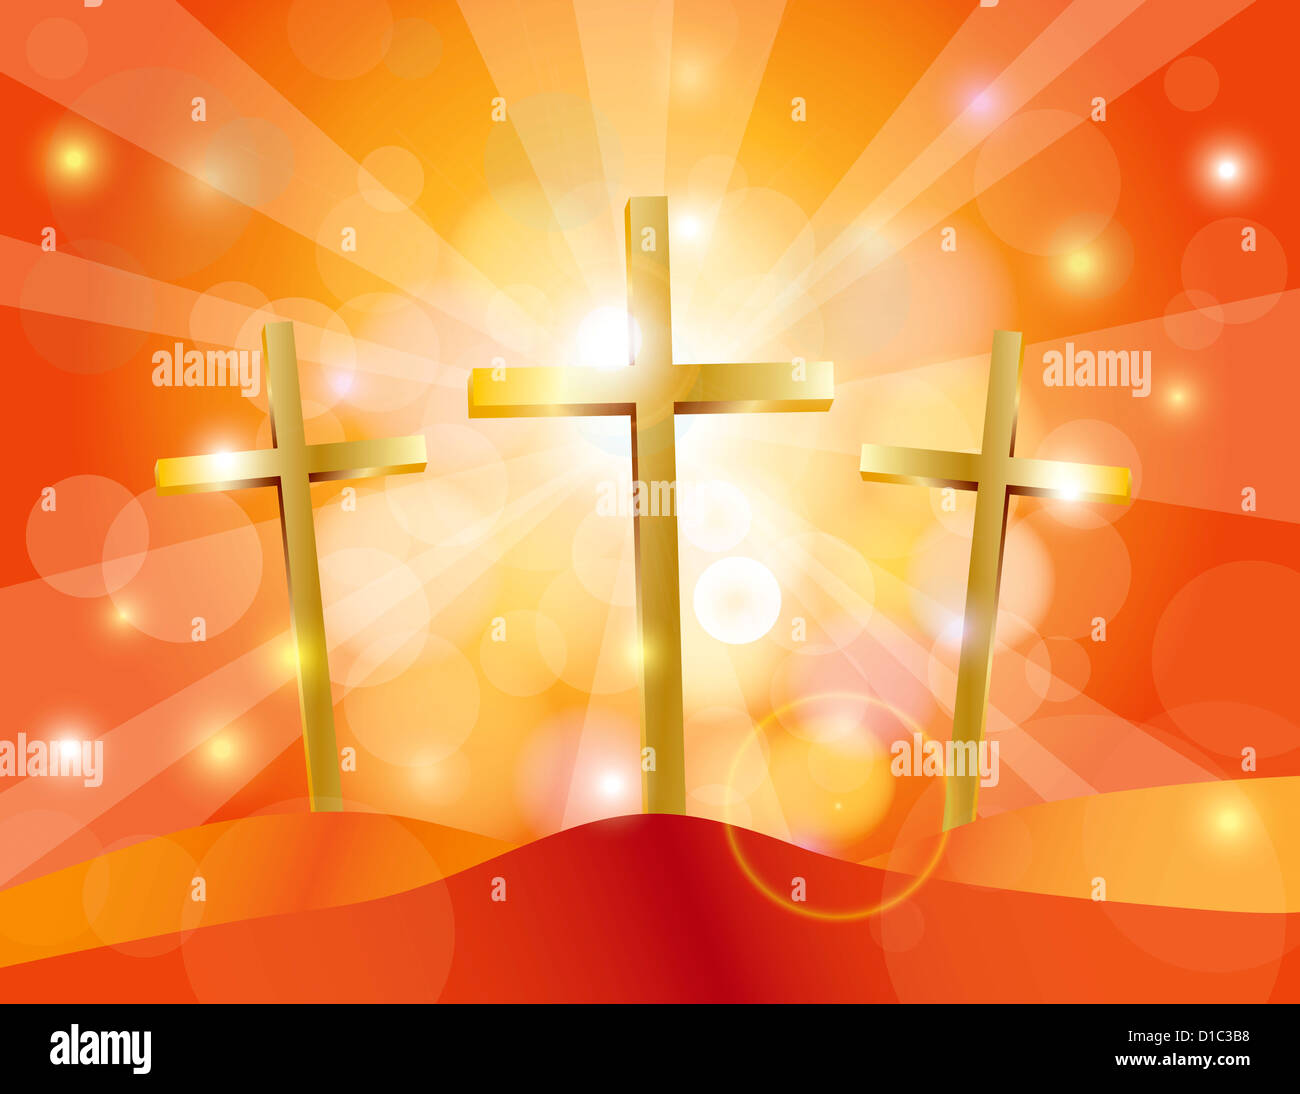 Happy Easter Day Good Friday Gold Cross on Sun Rays on Sky Blue Bokeh Circles and Blurred Background Illustration Stock Photo